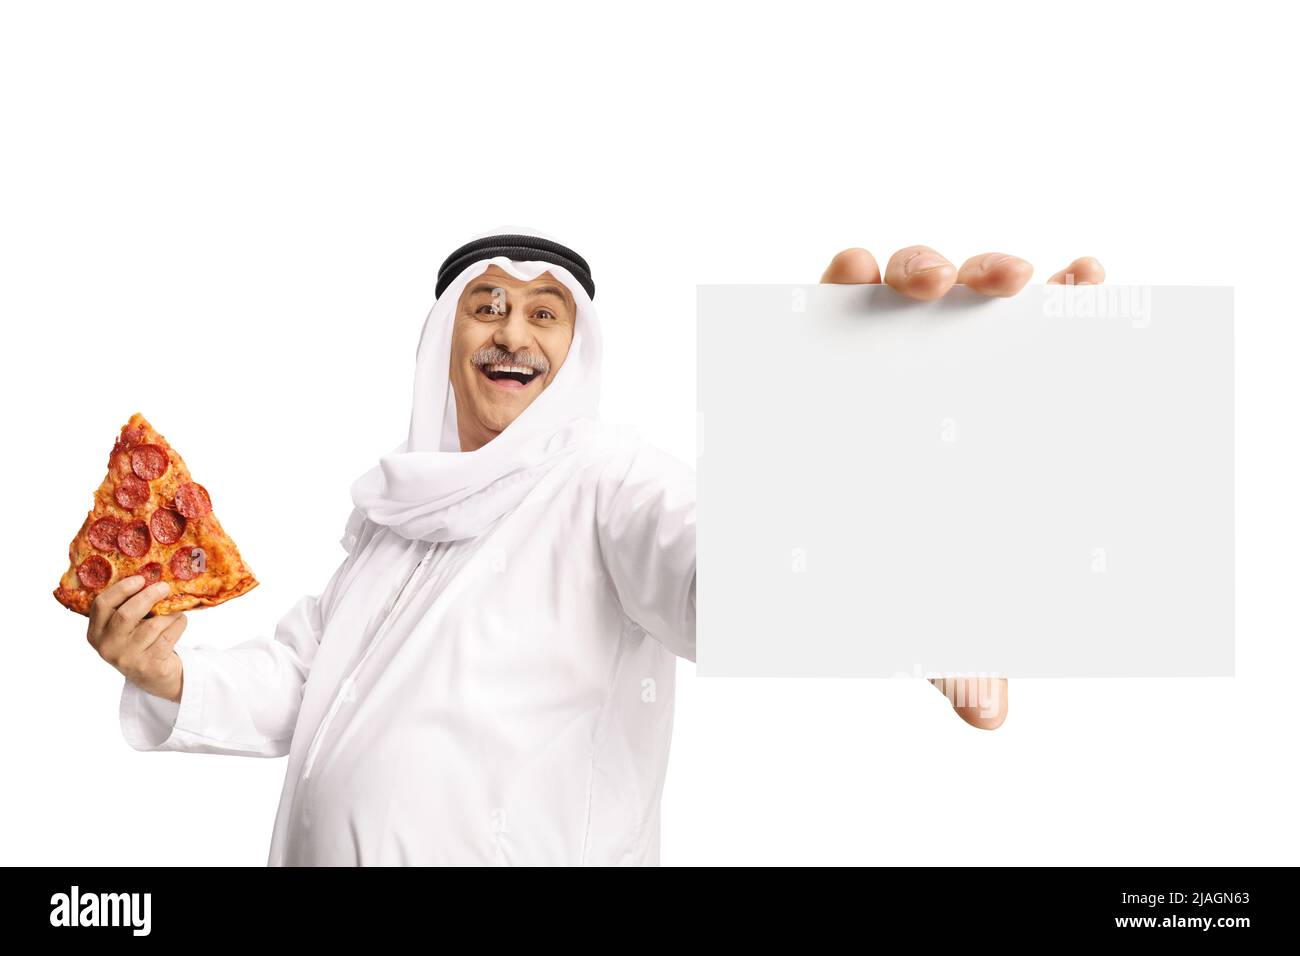 Cheerful mature arab man holding pepperoni pizza slice and showing a blank card isolated on white background Stock Photo